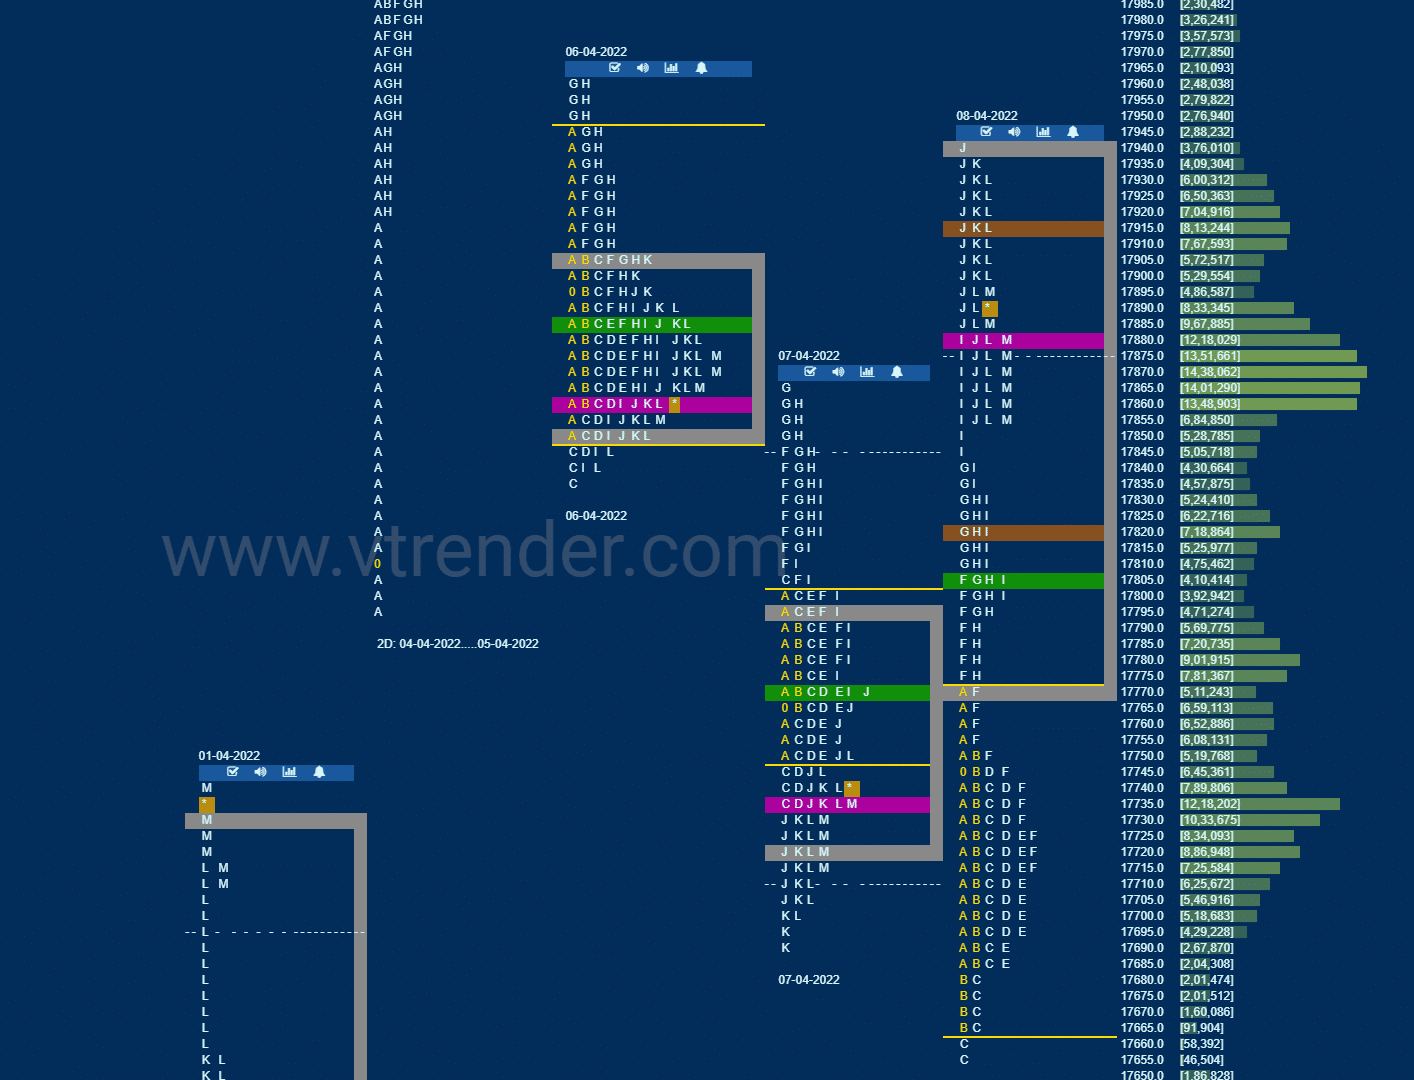 Nf 5 Market Profile Analysis Dated 08Th April 2022 Banknifty Futures, Charts, Day Trading, Intraday Trading, Intraday Trading Strategies, Market Profile, Market Profile Trading Strategies, Nifty Futures, Order Flow Analysis, Support And Resistance, Technical Analysis, Trading Strategies, Volume Profile Trading